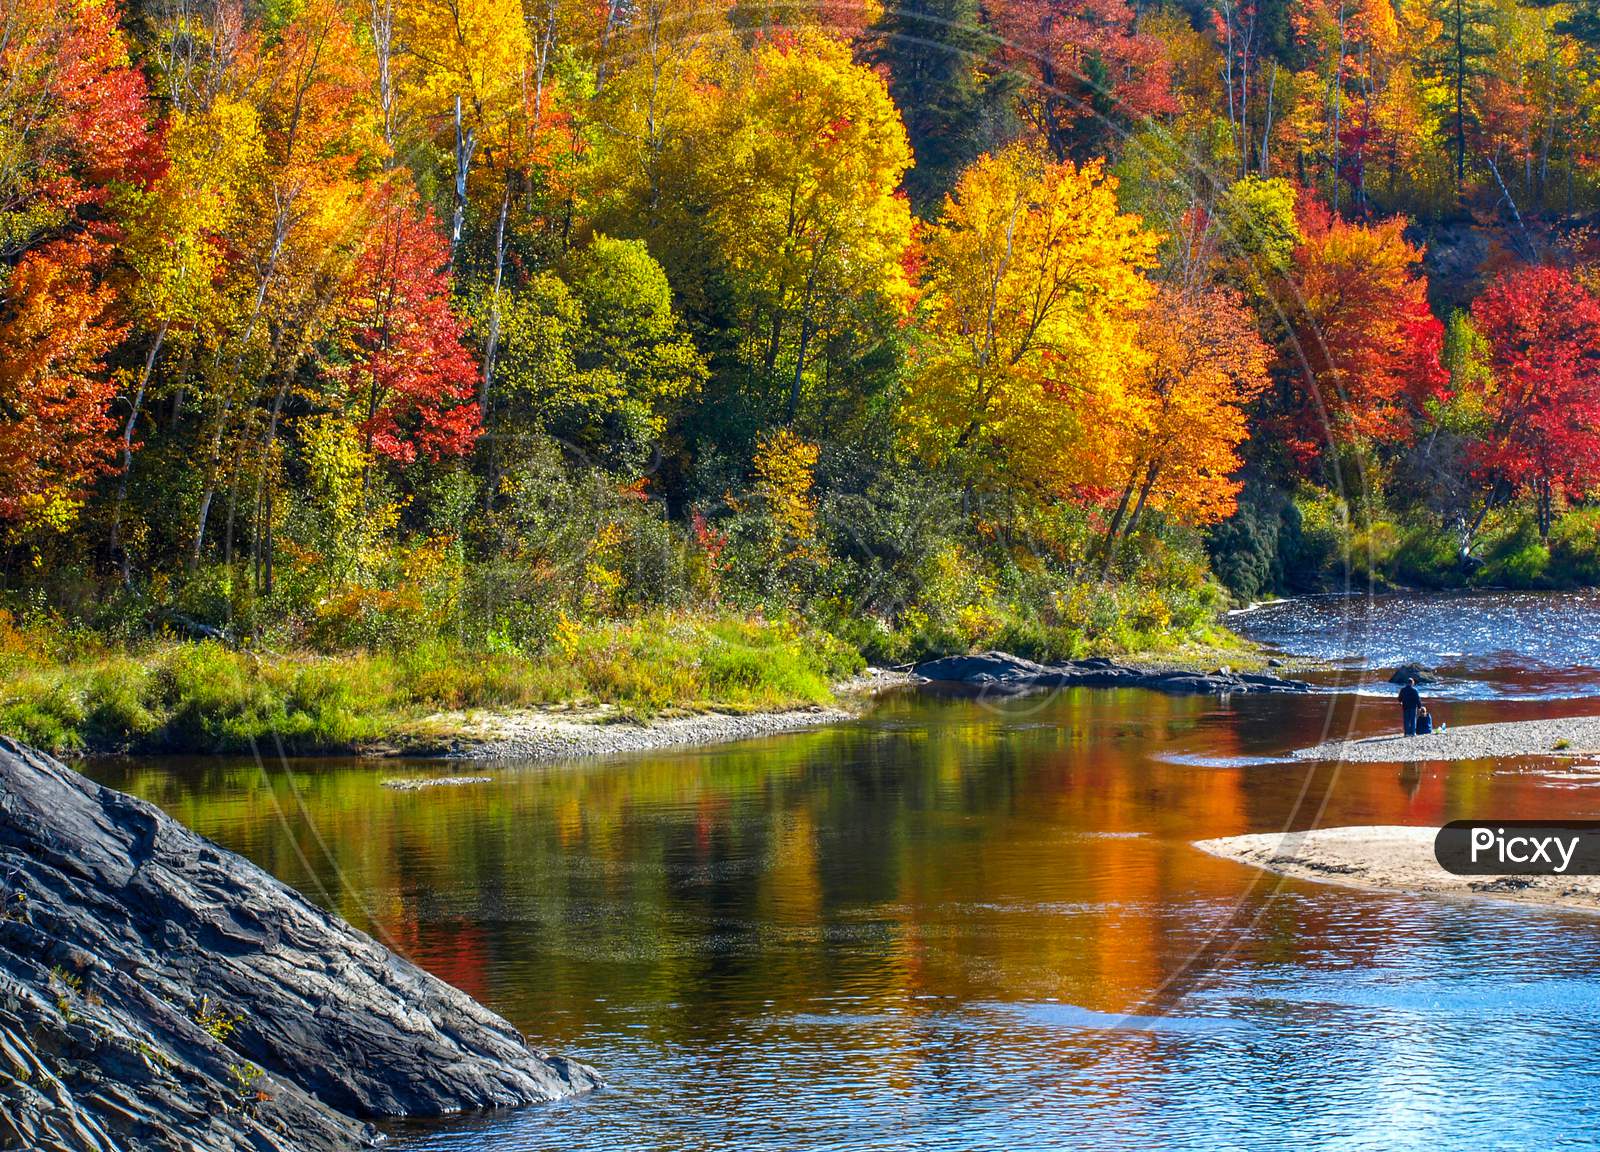 Gold and red reflecting off a slow meandering river, Chutes Prov Park, ON, Canada